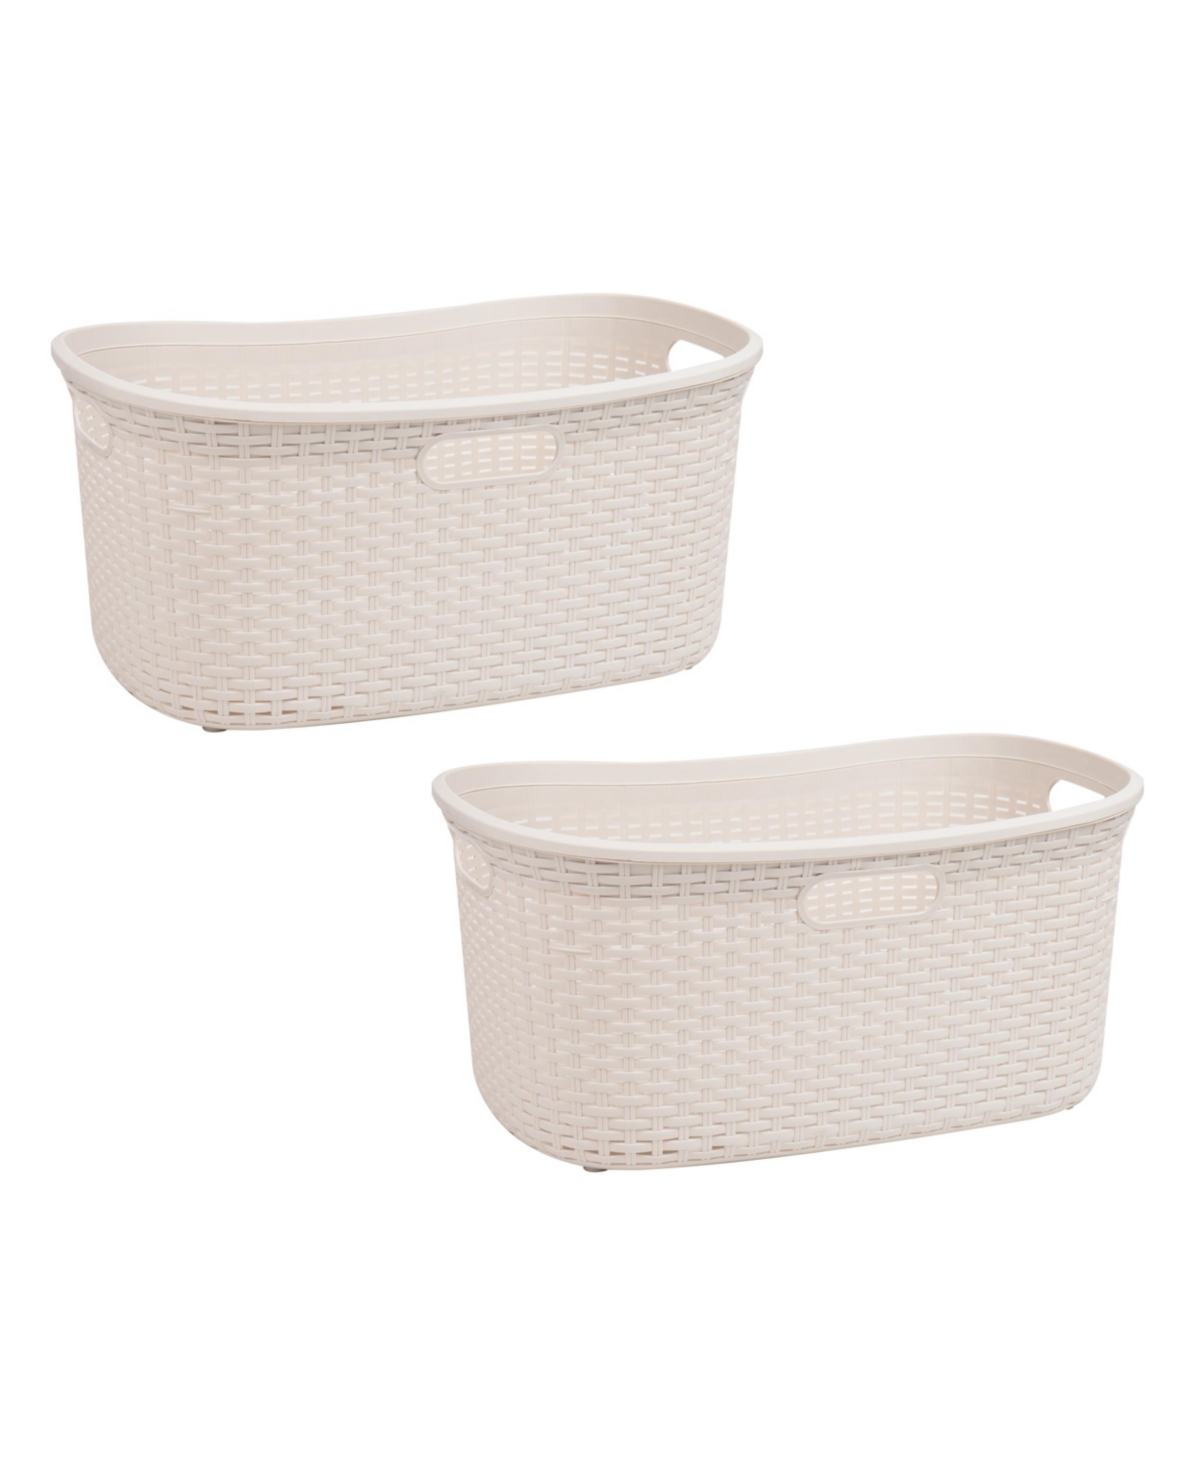 Basket Collection Laundry Basket, Cut Out Handles, Ventilated, Set of 2 - Ivory